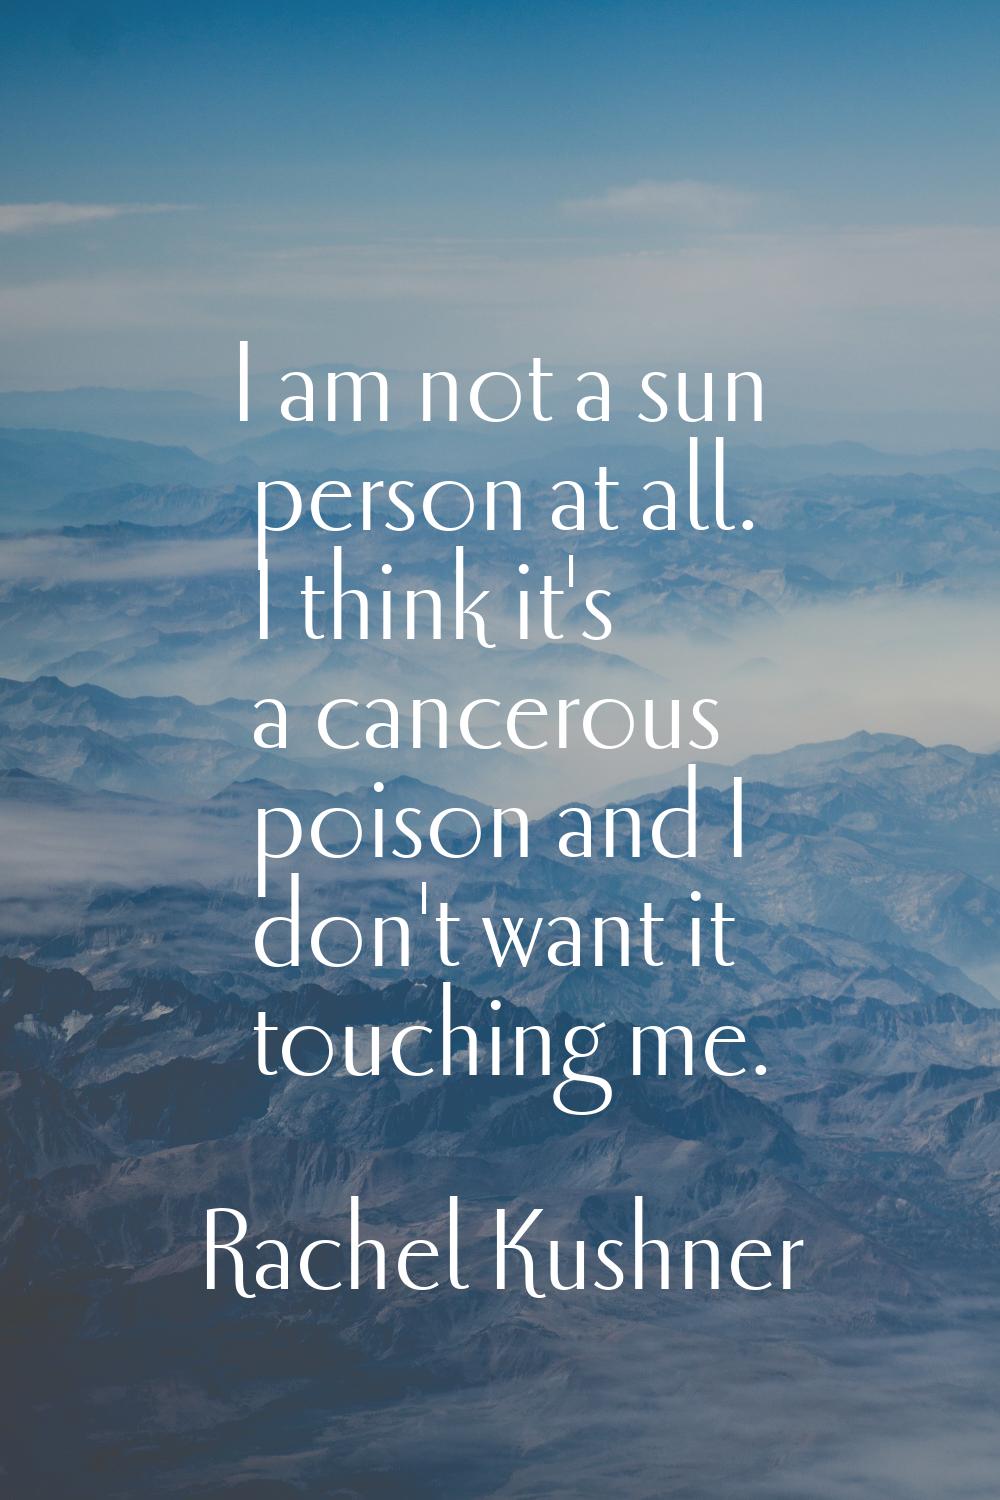 I am not a sun person at all. I think it's a cancerous poison and I don't want it touching me.